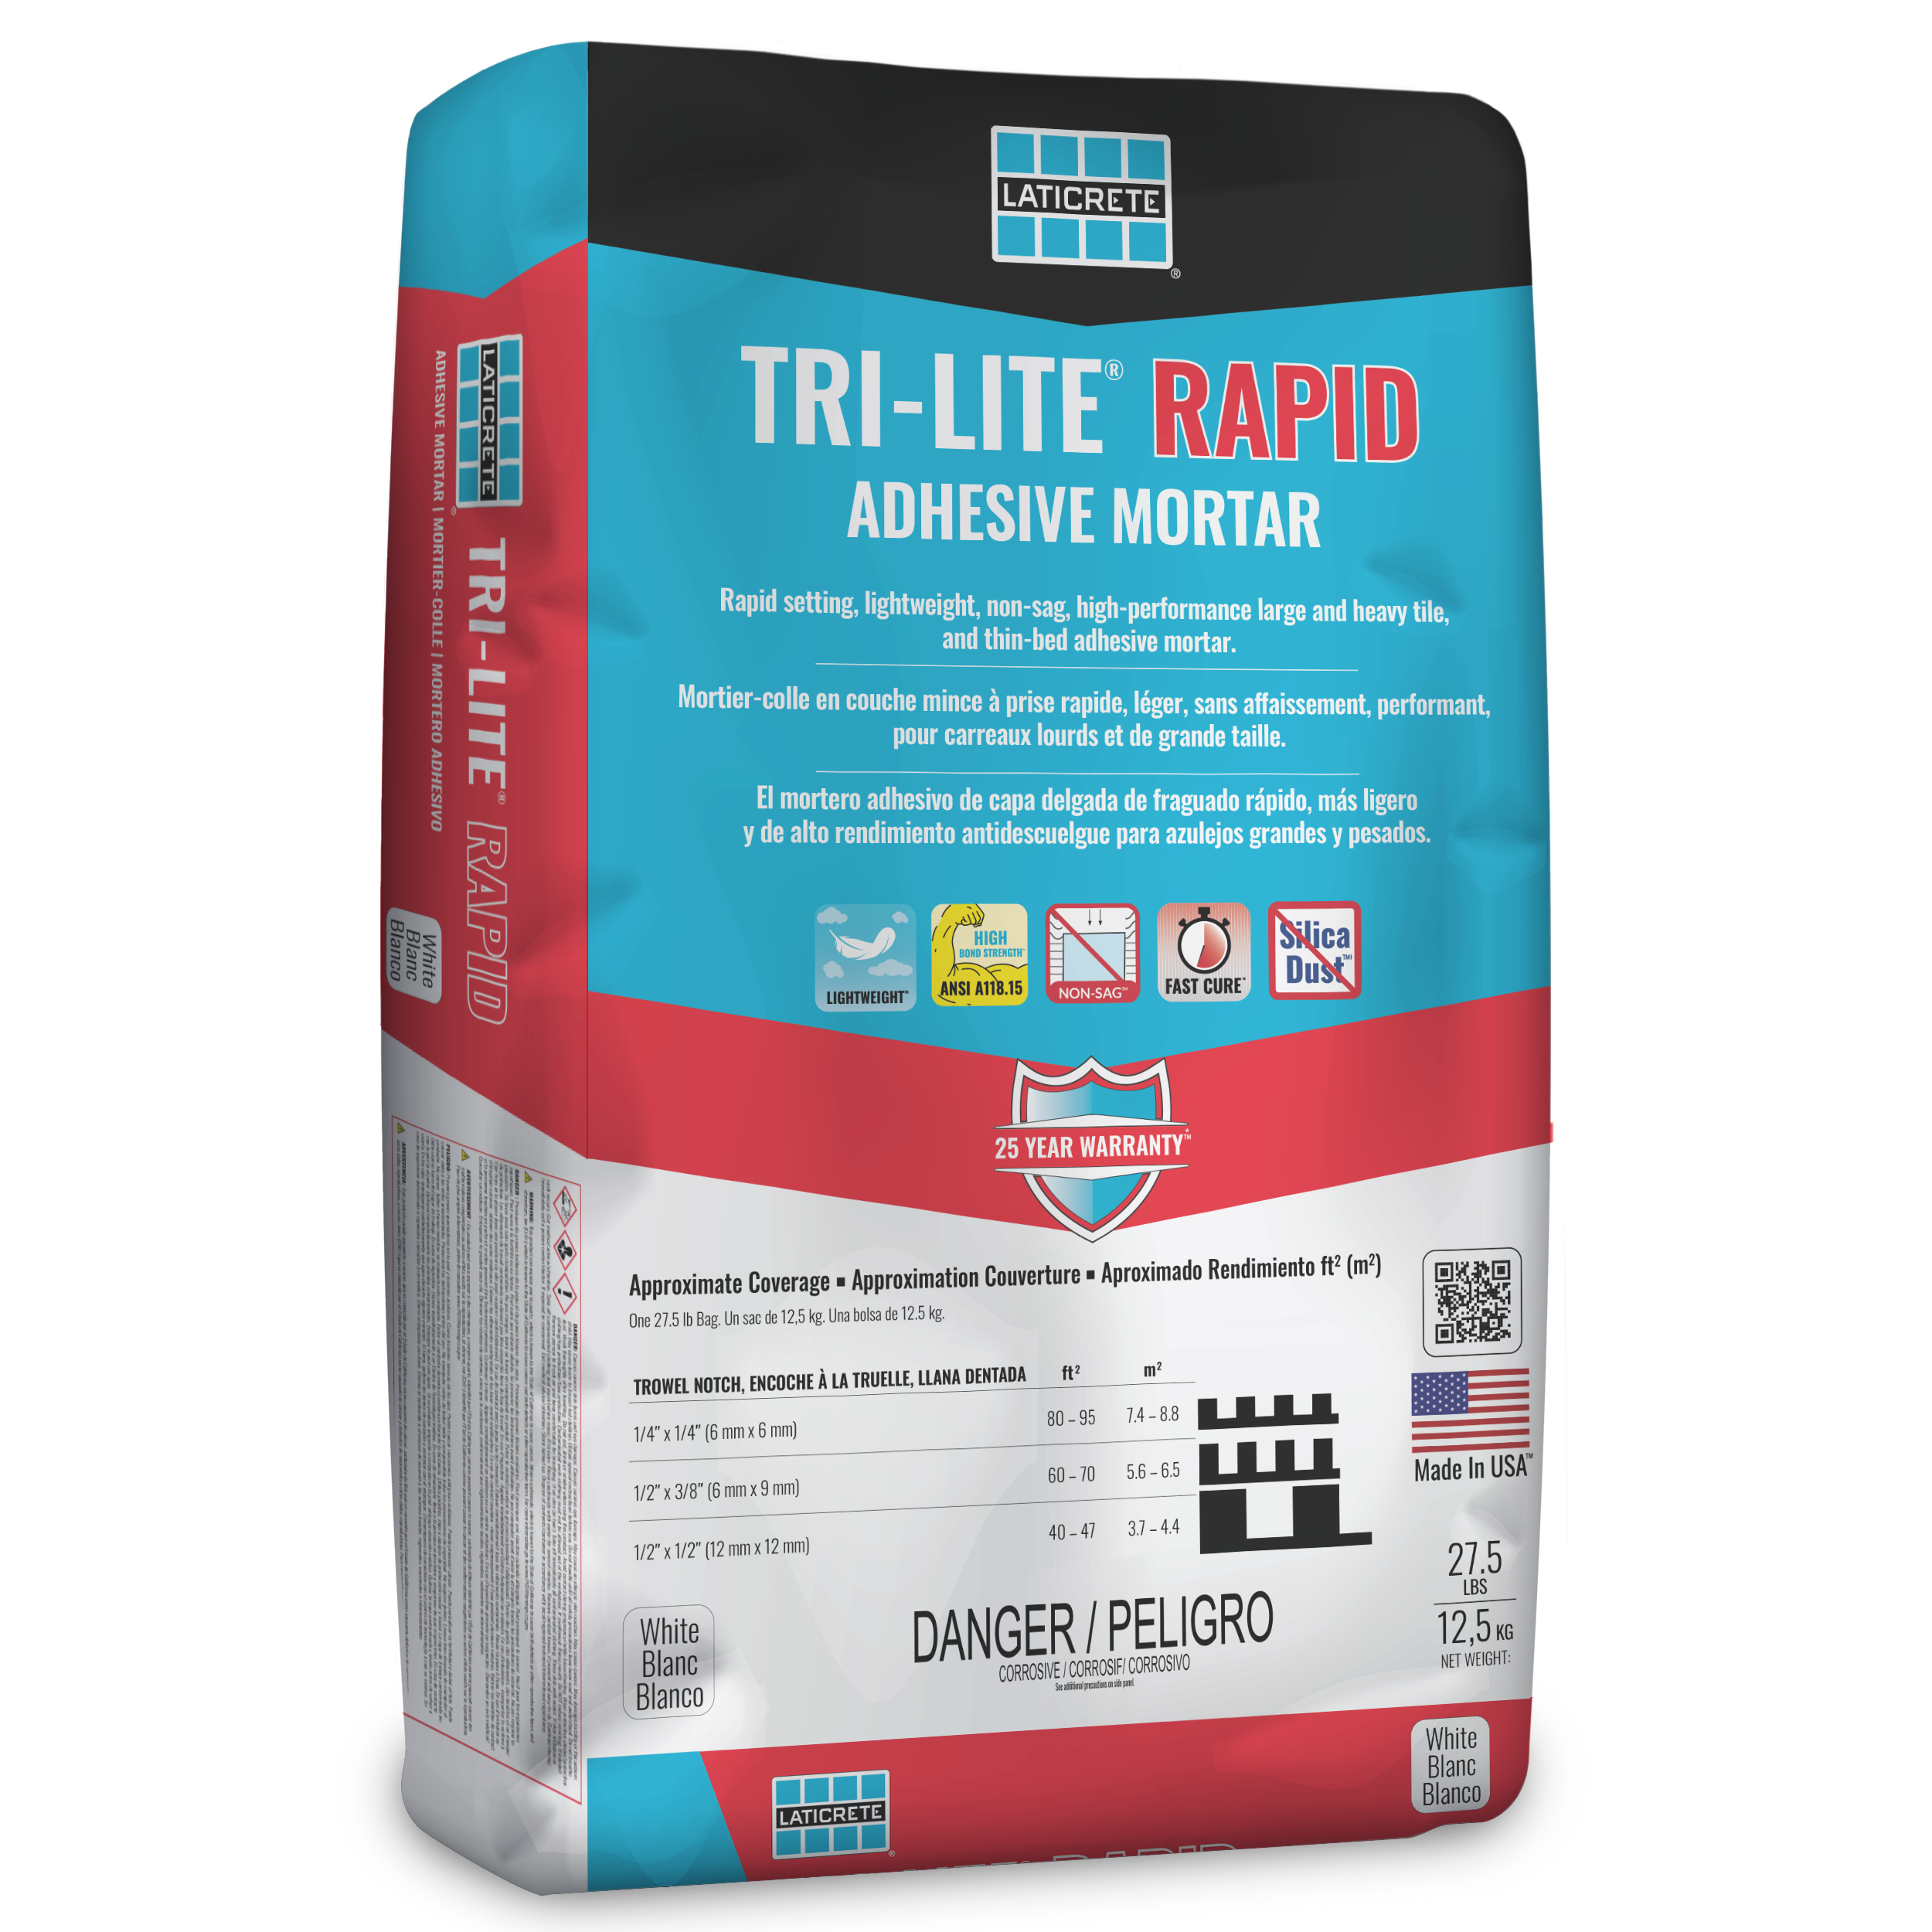 What is The Best Tile Adhesive Brand For Large Tiles?